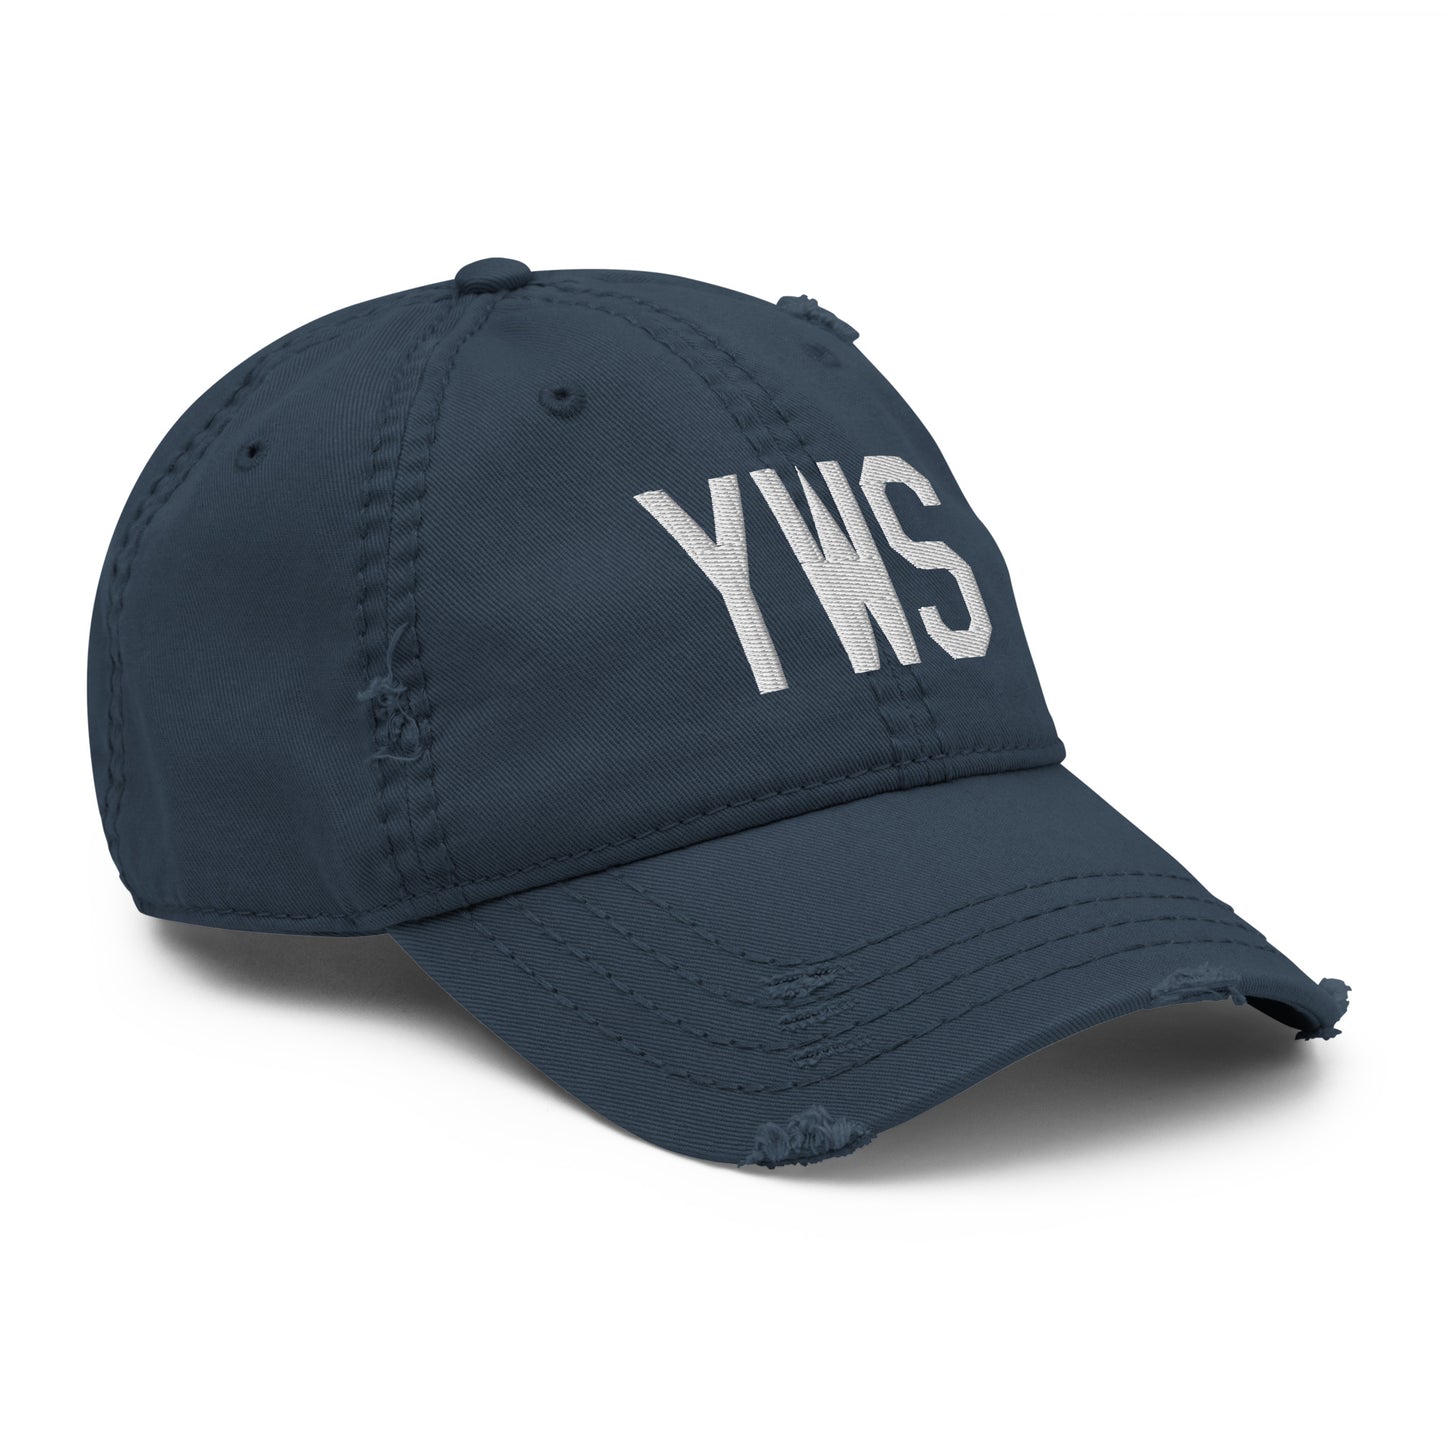 Airport Code Distressed Hat - White • YWS Whistler • YHM Designs - Image 14